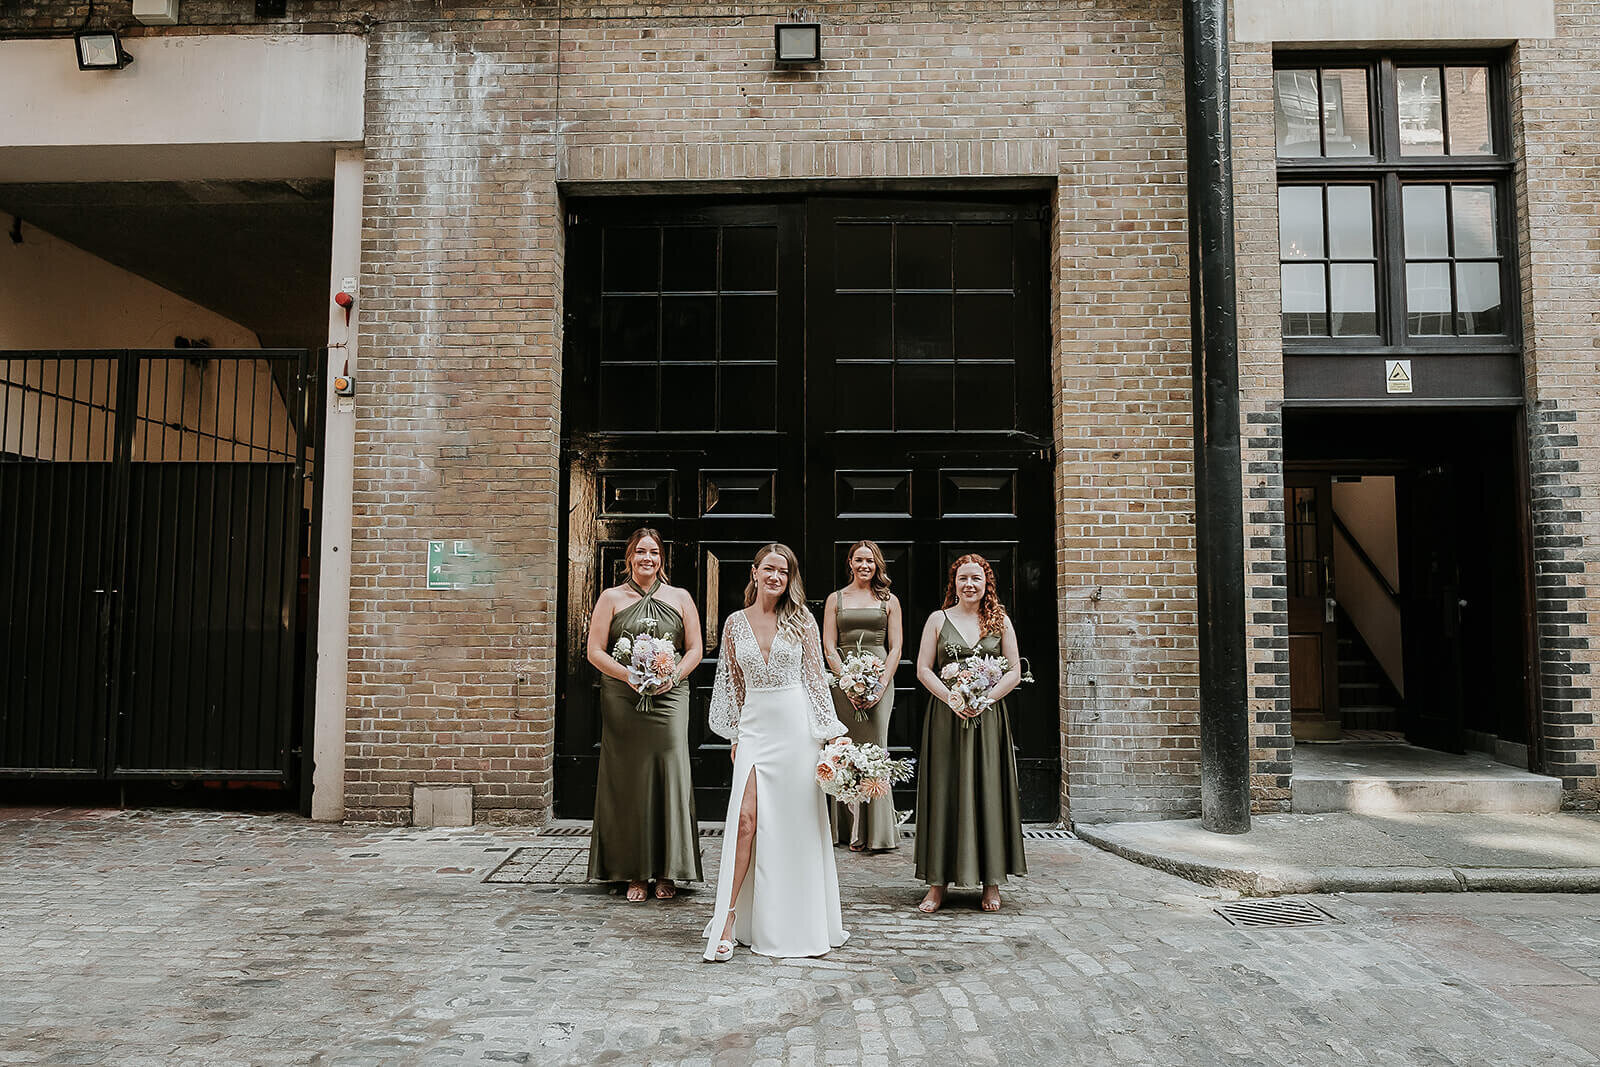 Documentary style photo of bride and bridesmaids